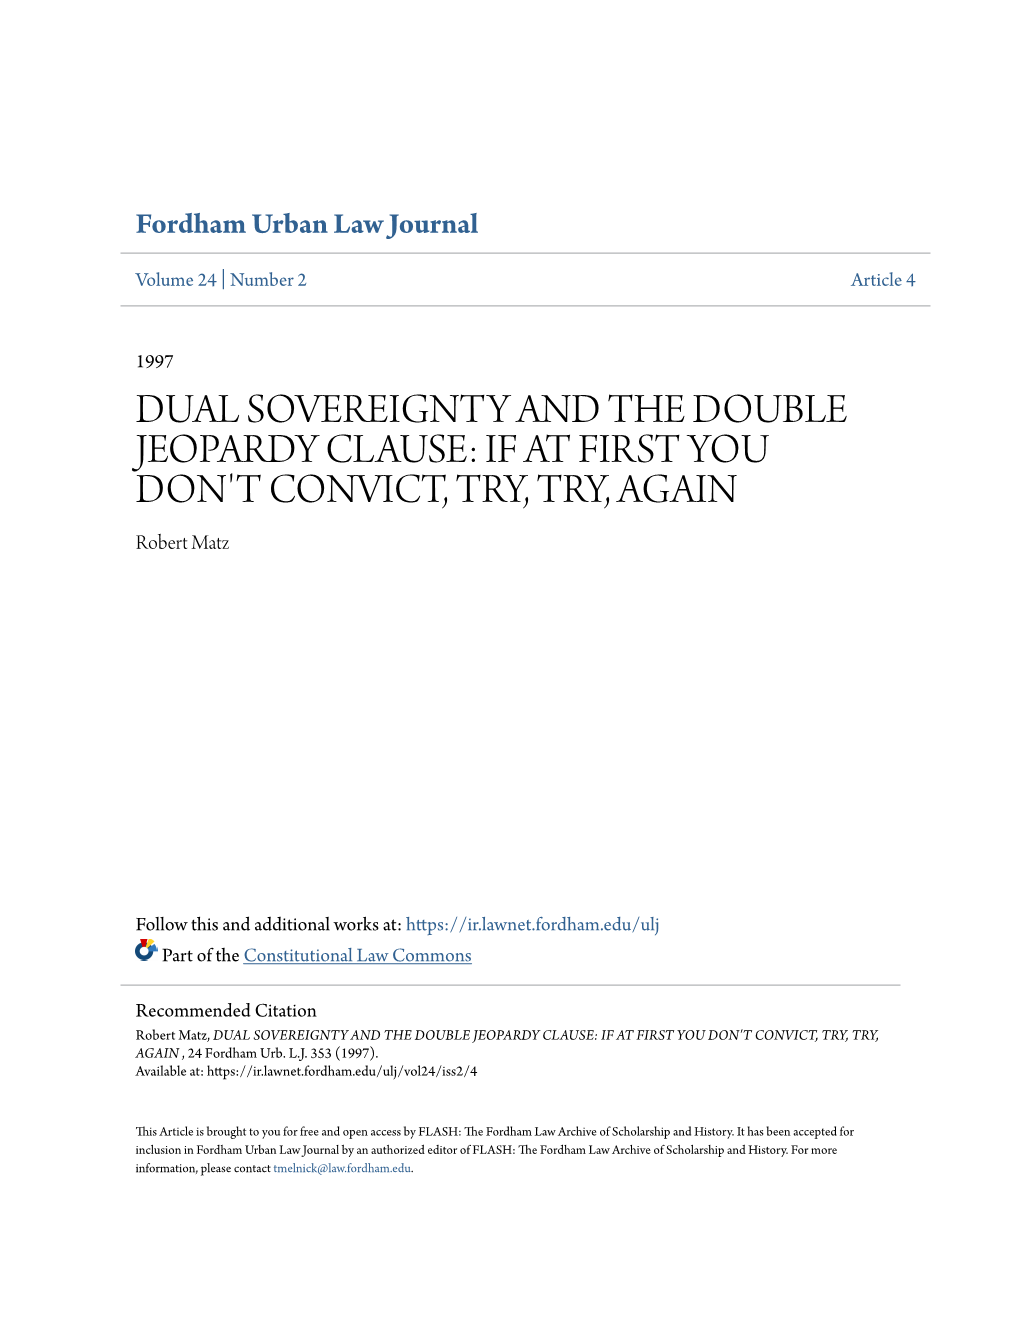 DUAL SOVEREIGNTY and the DOUBLE JEOPARDY CLAUSE: IF at FIRST YOU DON't CONVICT, TRY, TRY, AGAIN Robert Matz